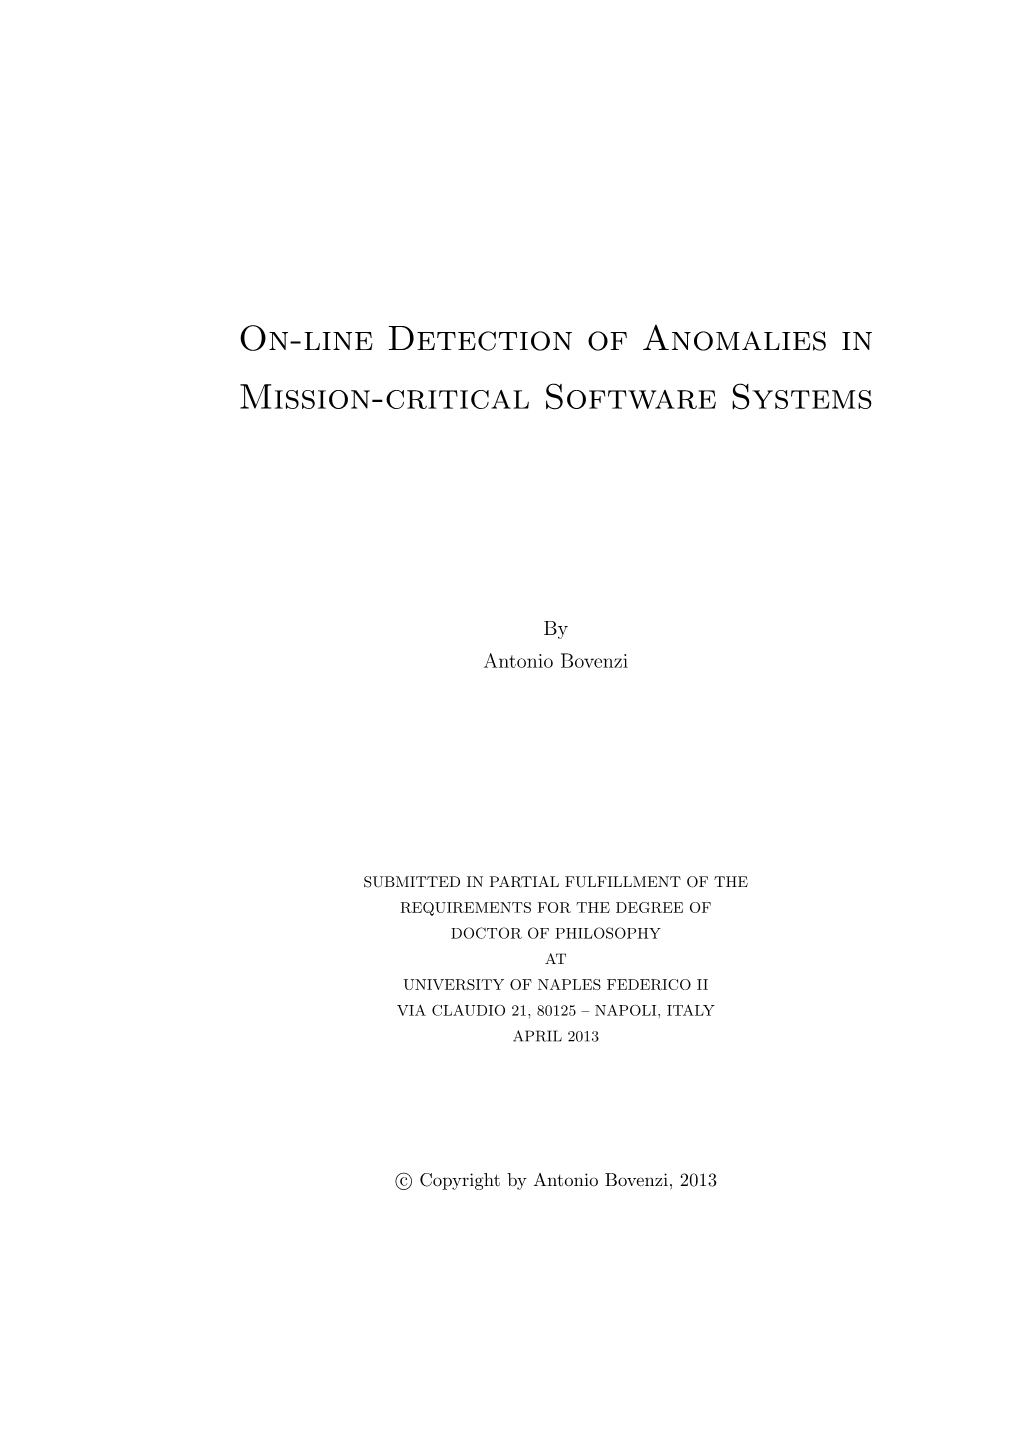 On-Line Detection of Anomalies in Mission-Critical Software Systems